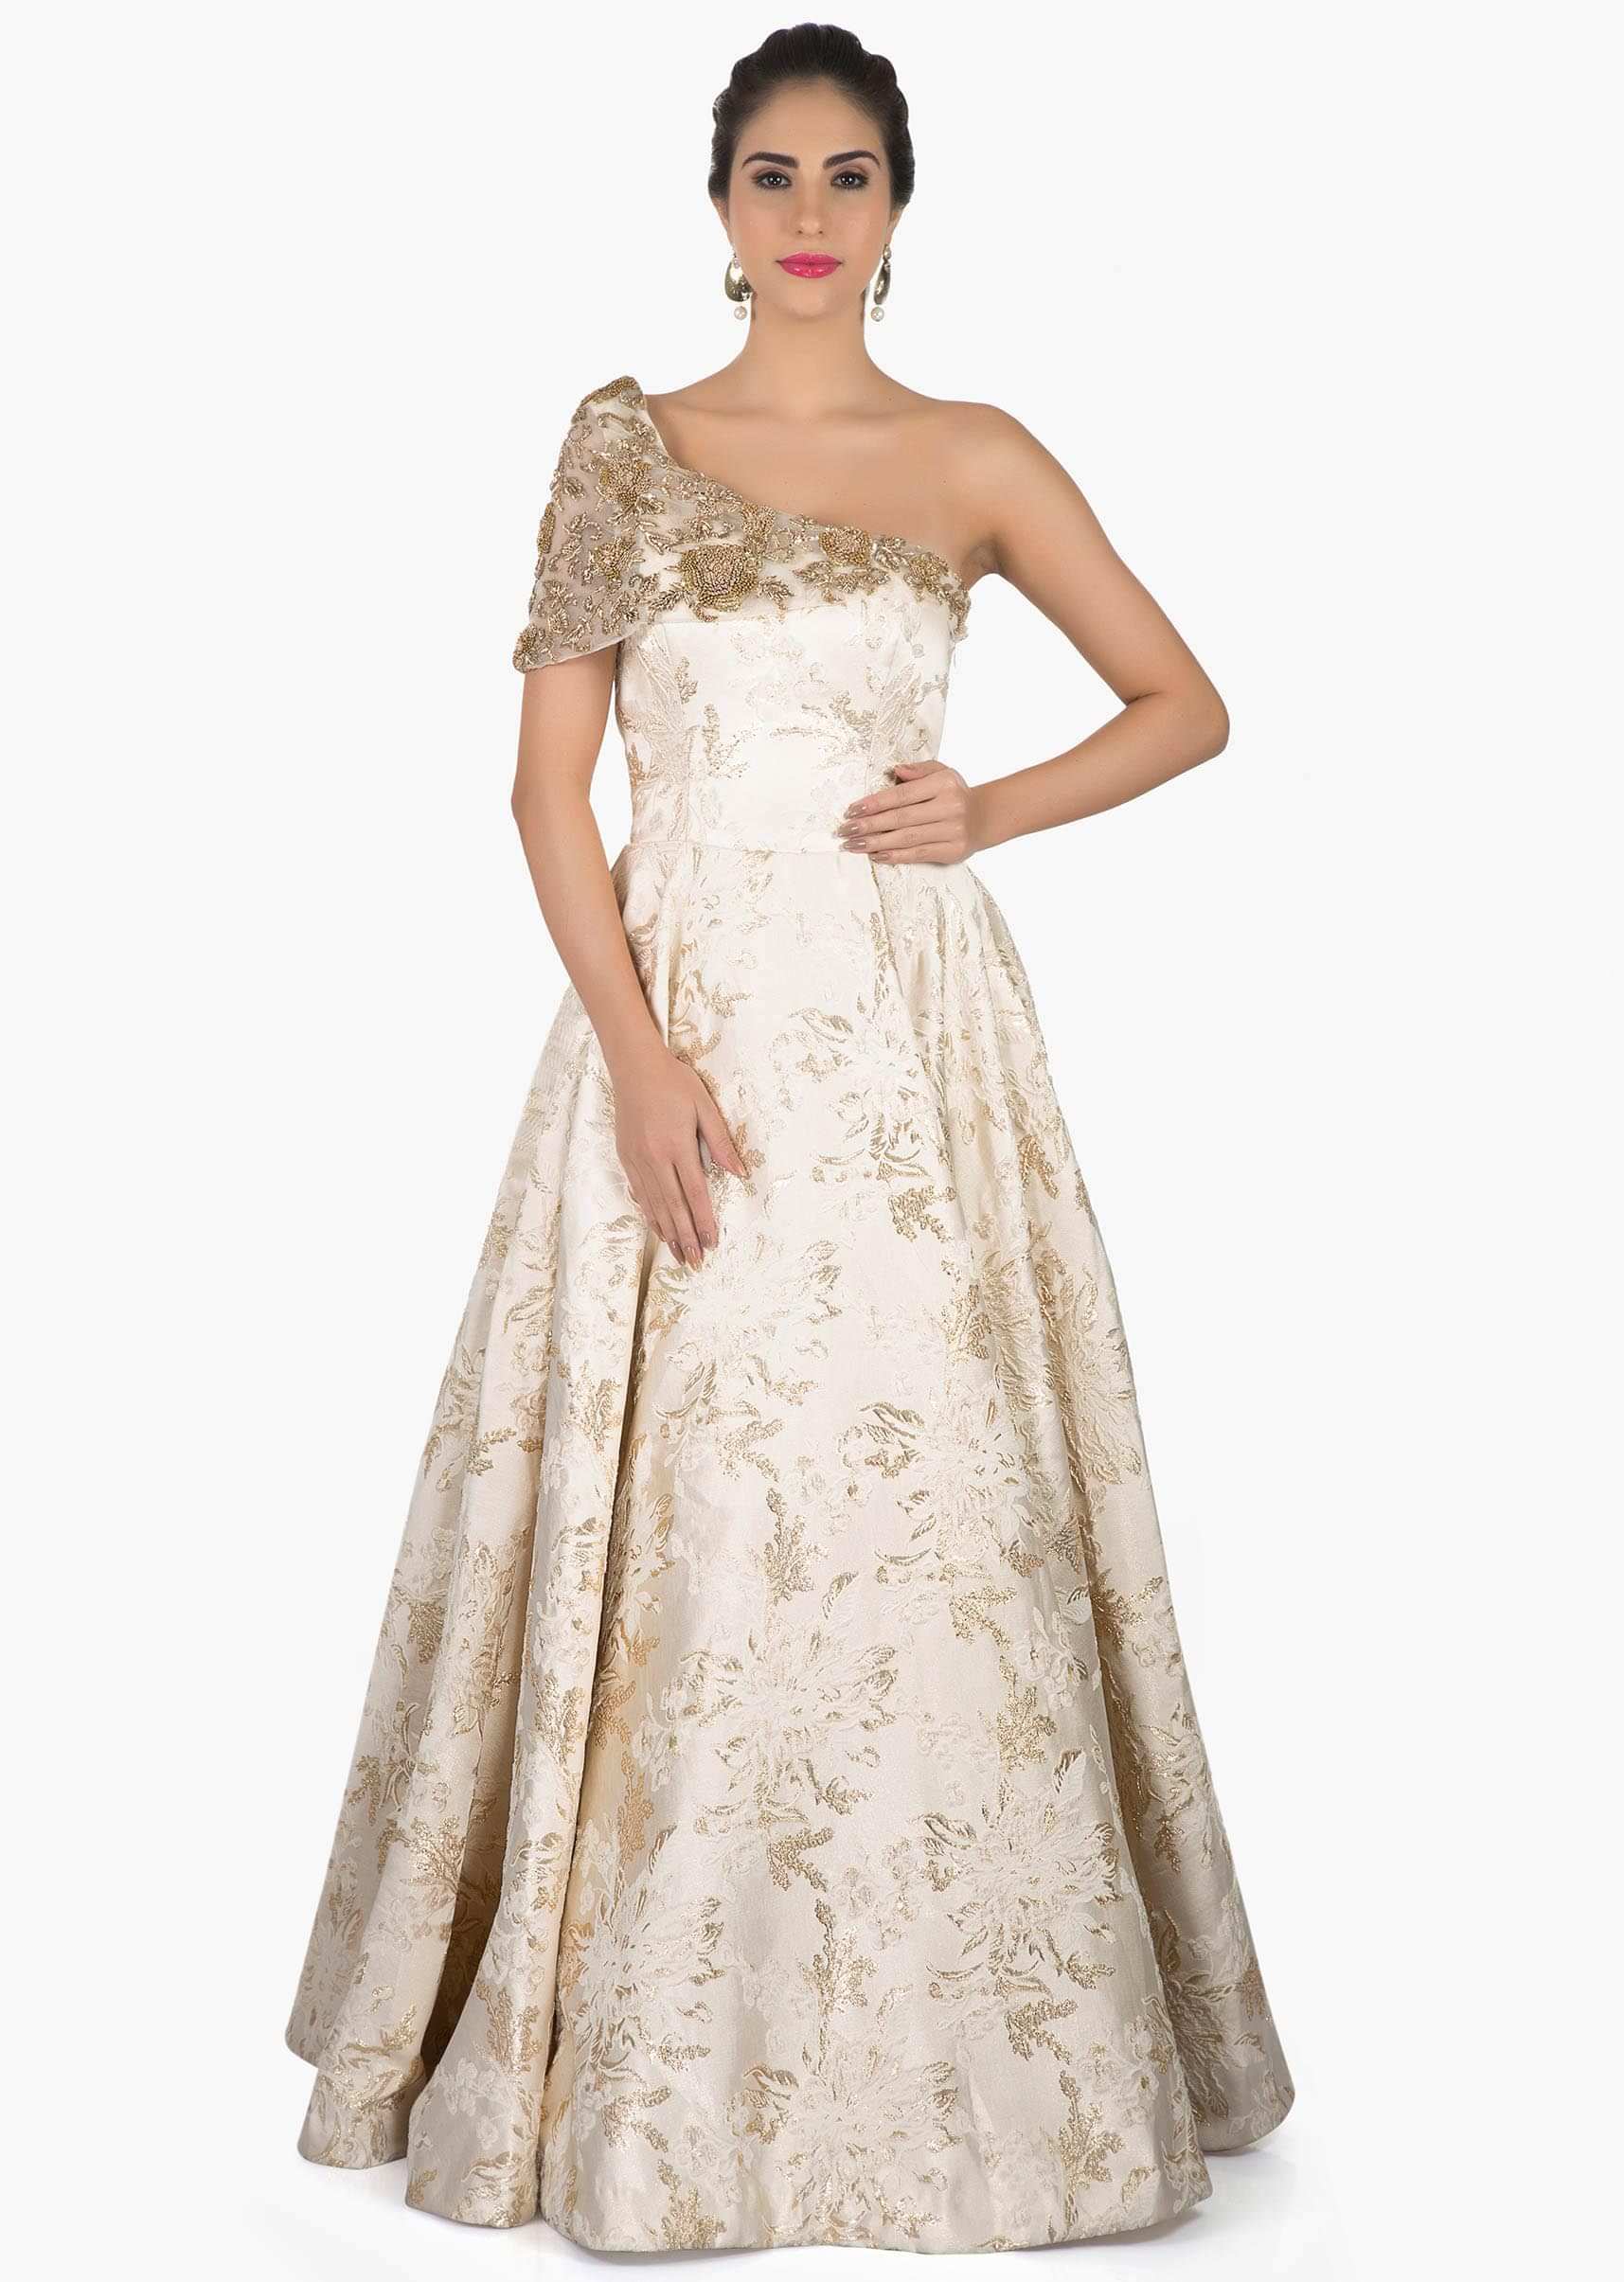 Cream colored off shoulder gown only on Kalki 